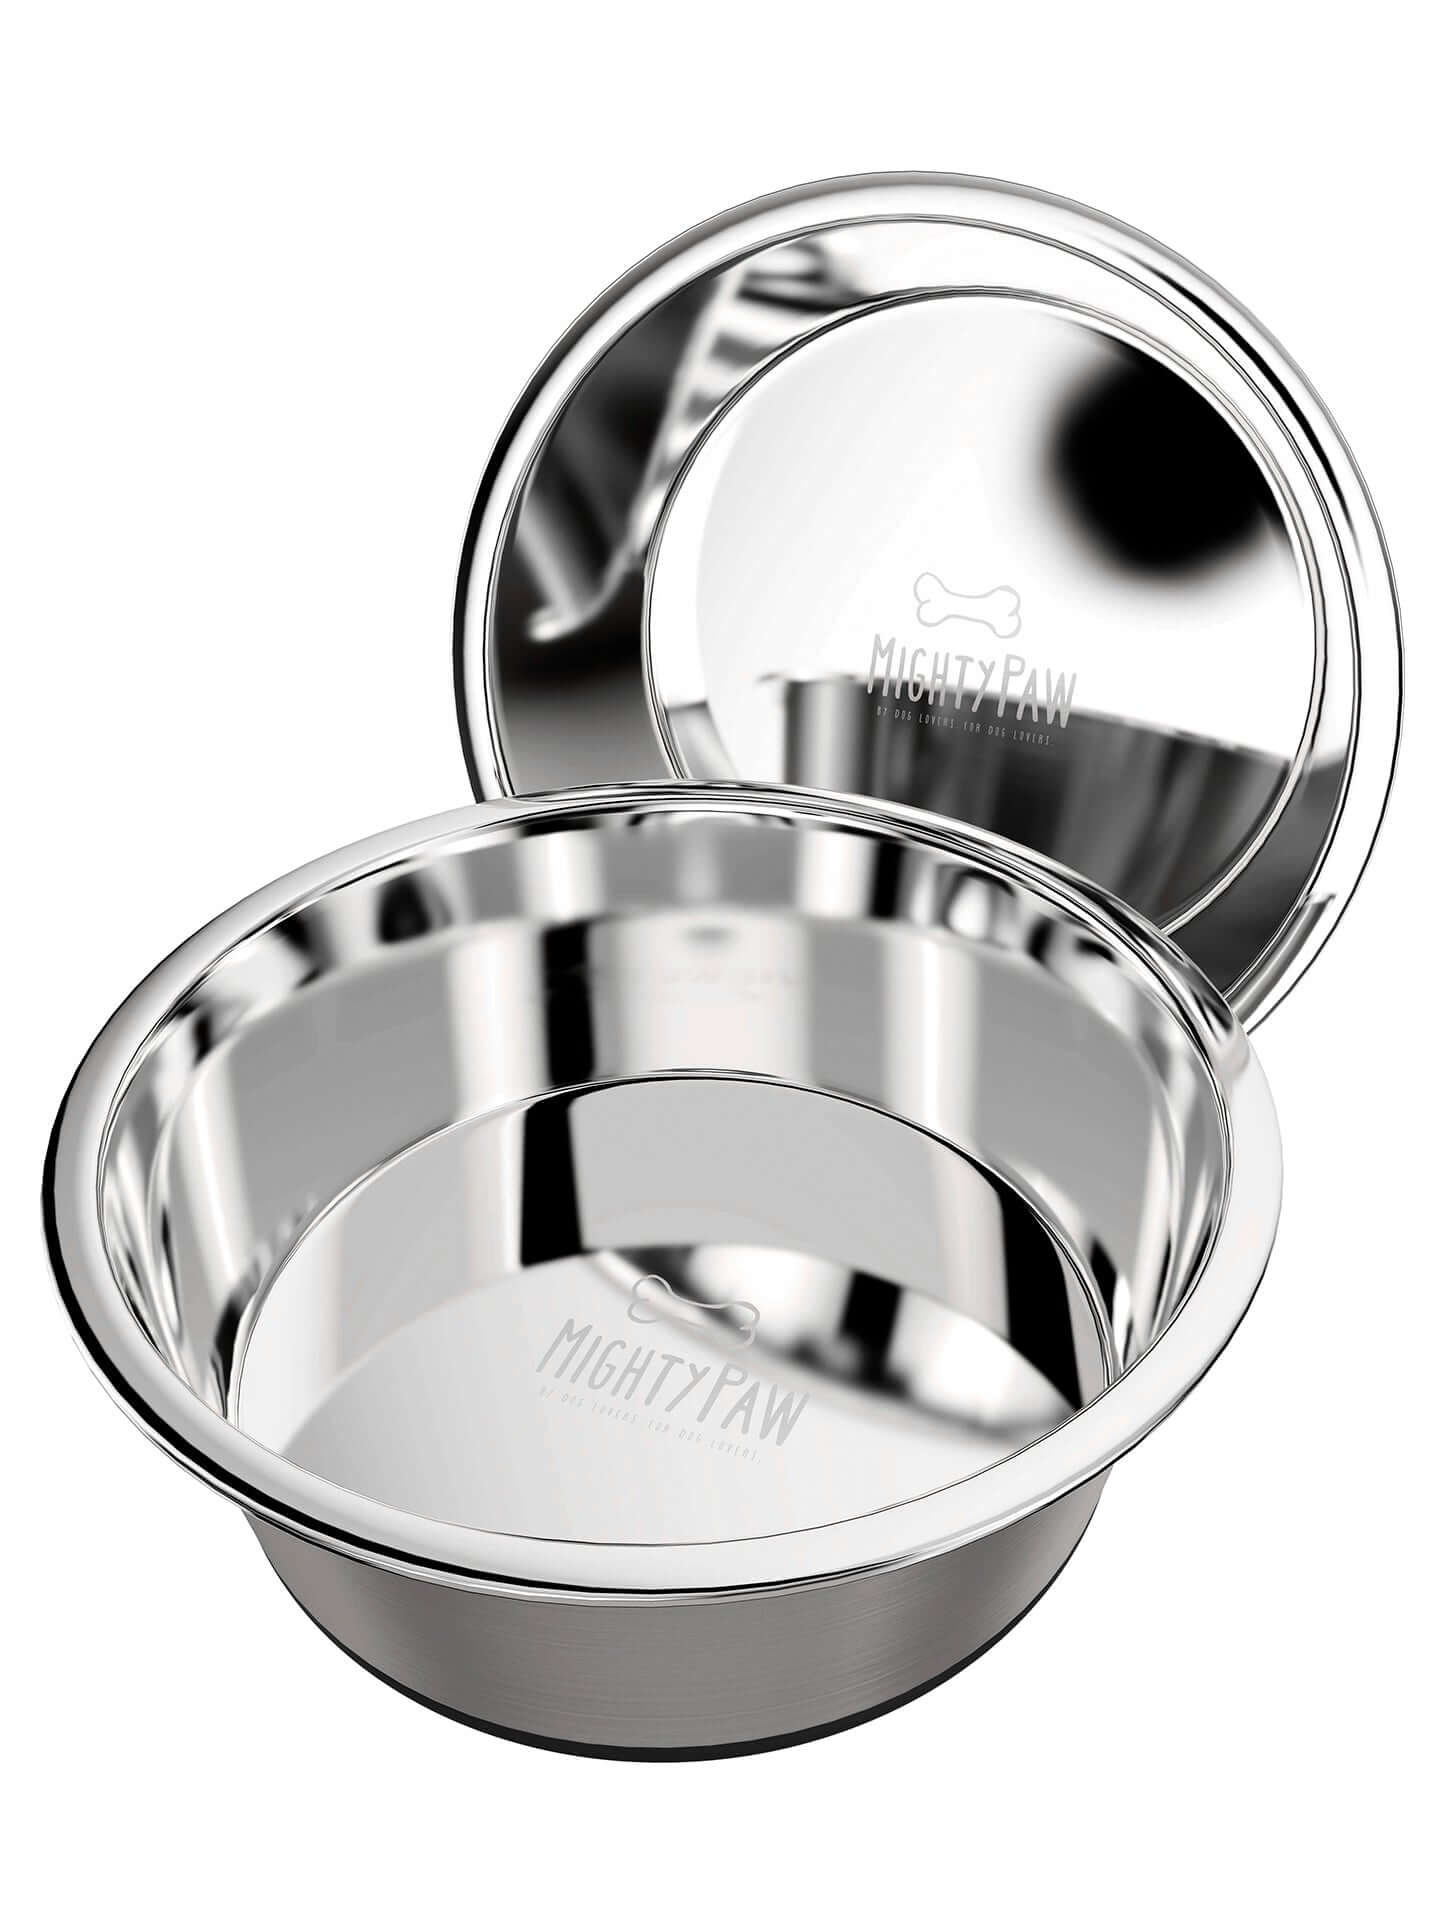 Dog Double Bowls, 2 Stainless Steel Dog Bowl With No-spill No-skid